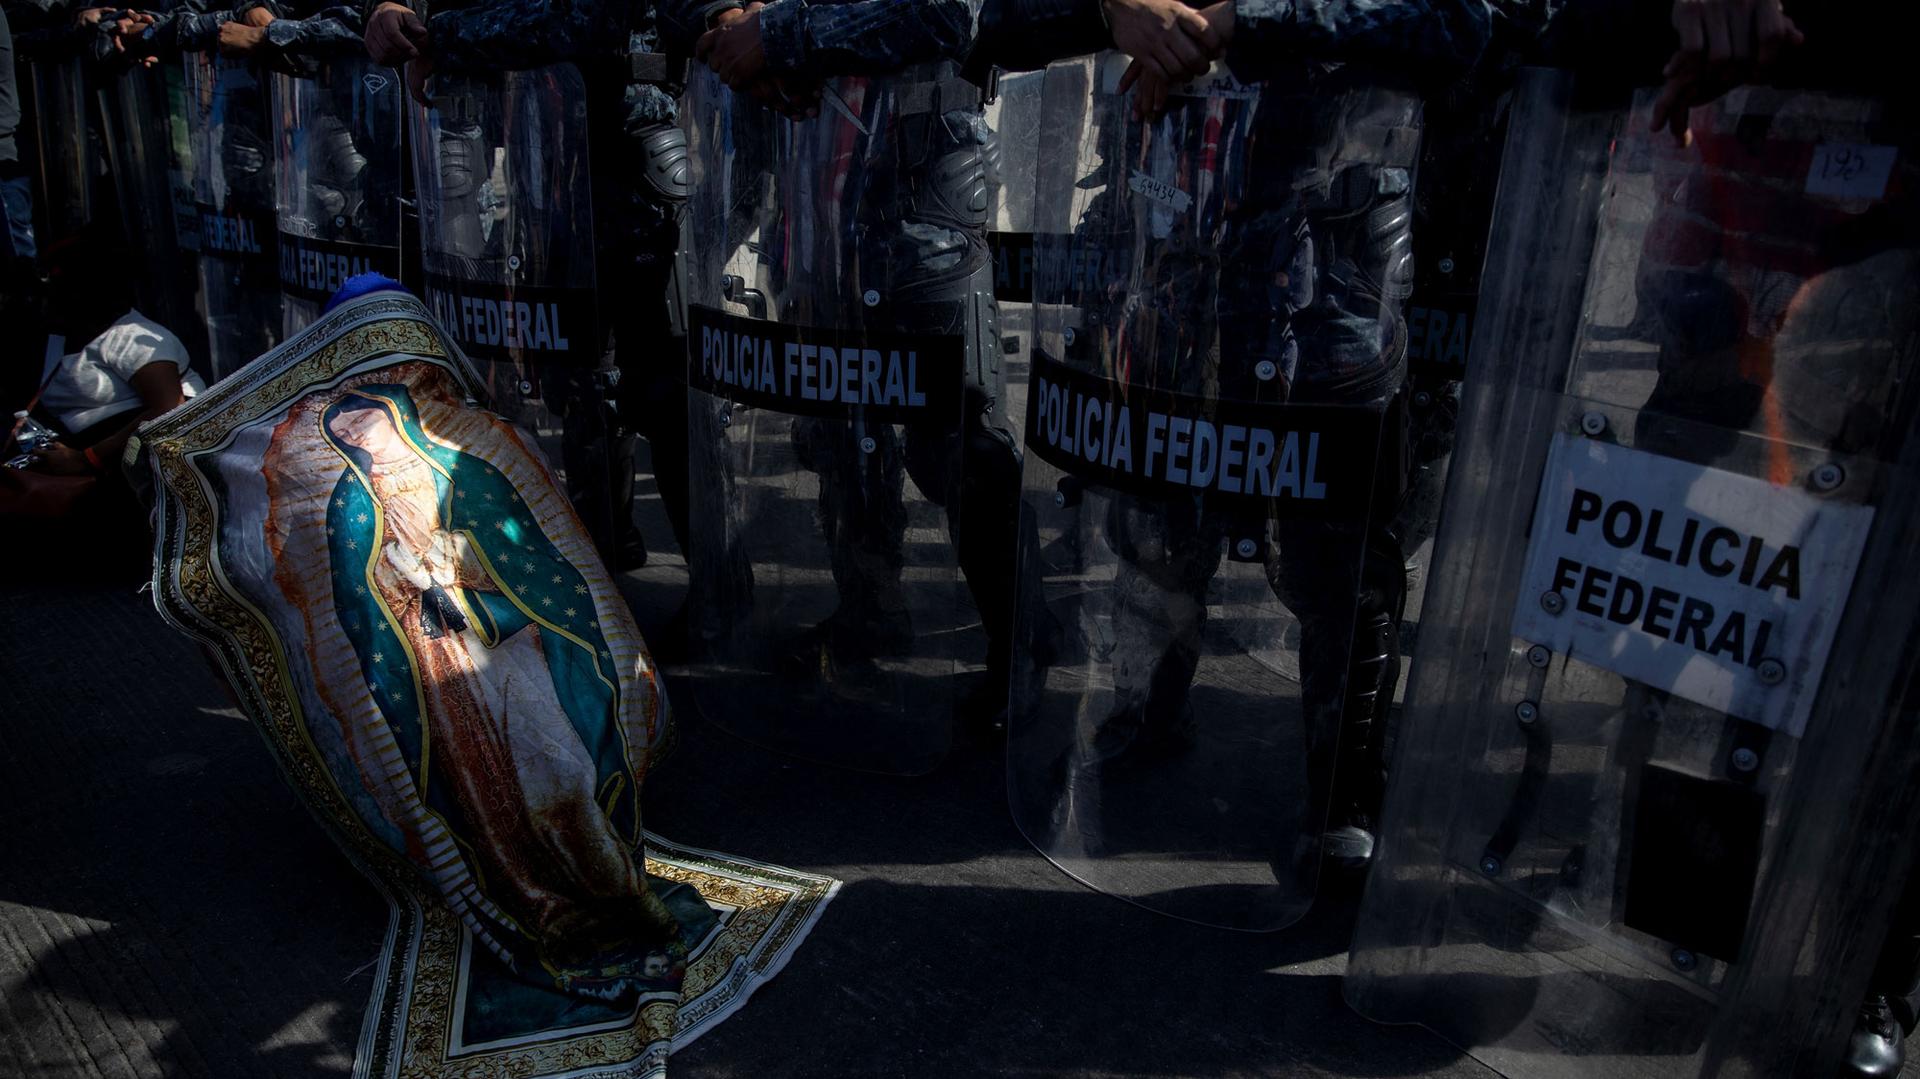 A migrant is shown wrapped with a banner depicting the Virgin of Guadalupe in front of a riot police with shield in Tijuana, Mexico.